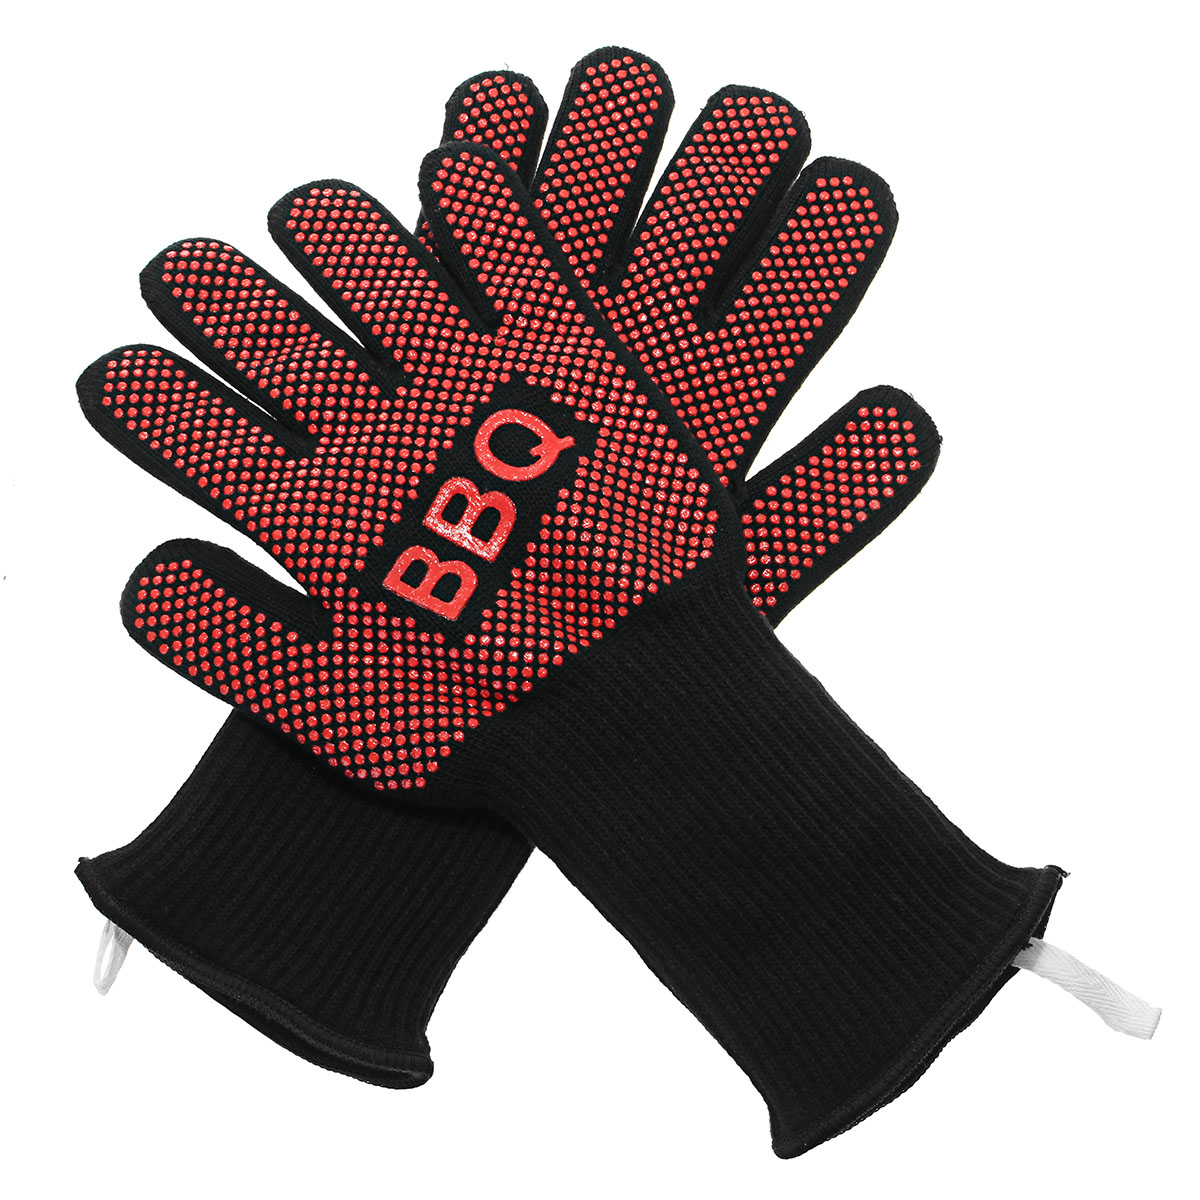 

2X Barbecue Heat Resistant Silicone Gloves Oven Kitchen Grill BBQ Cooking Mitts Security Glove